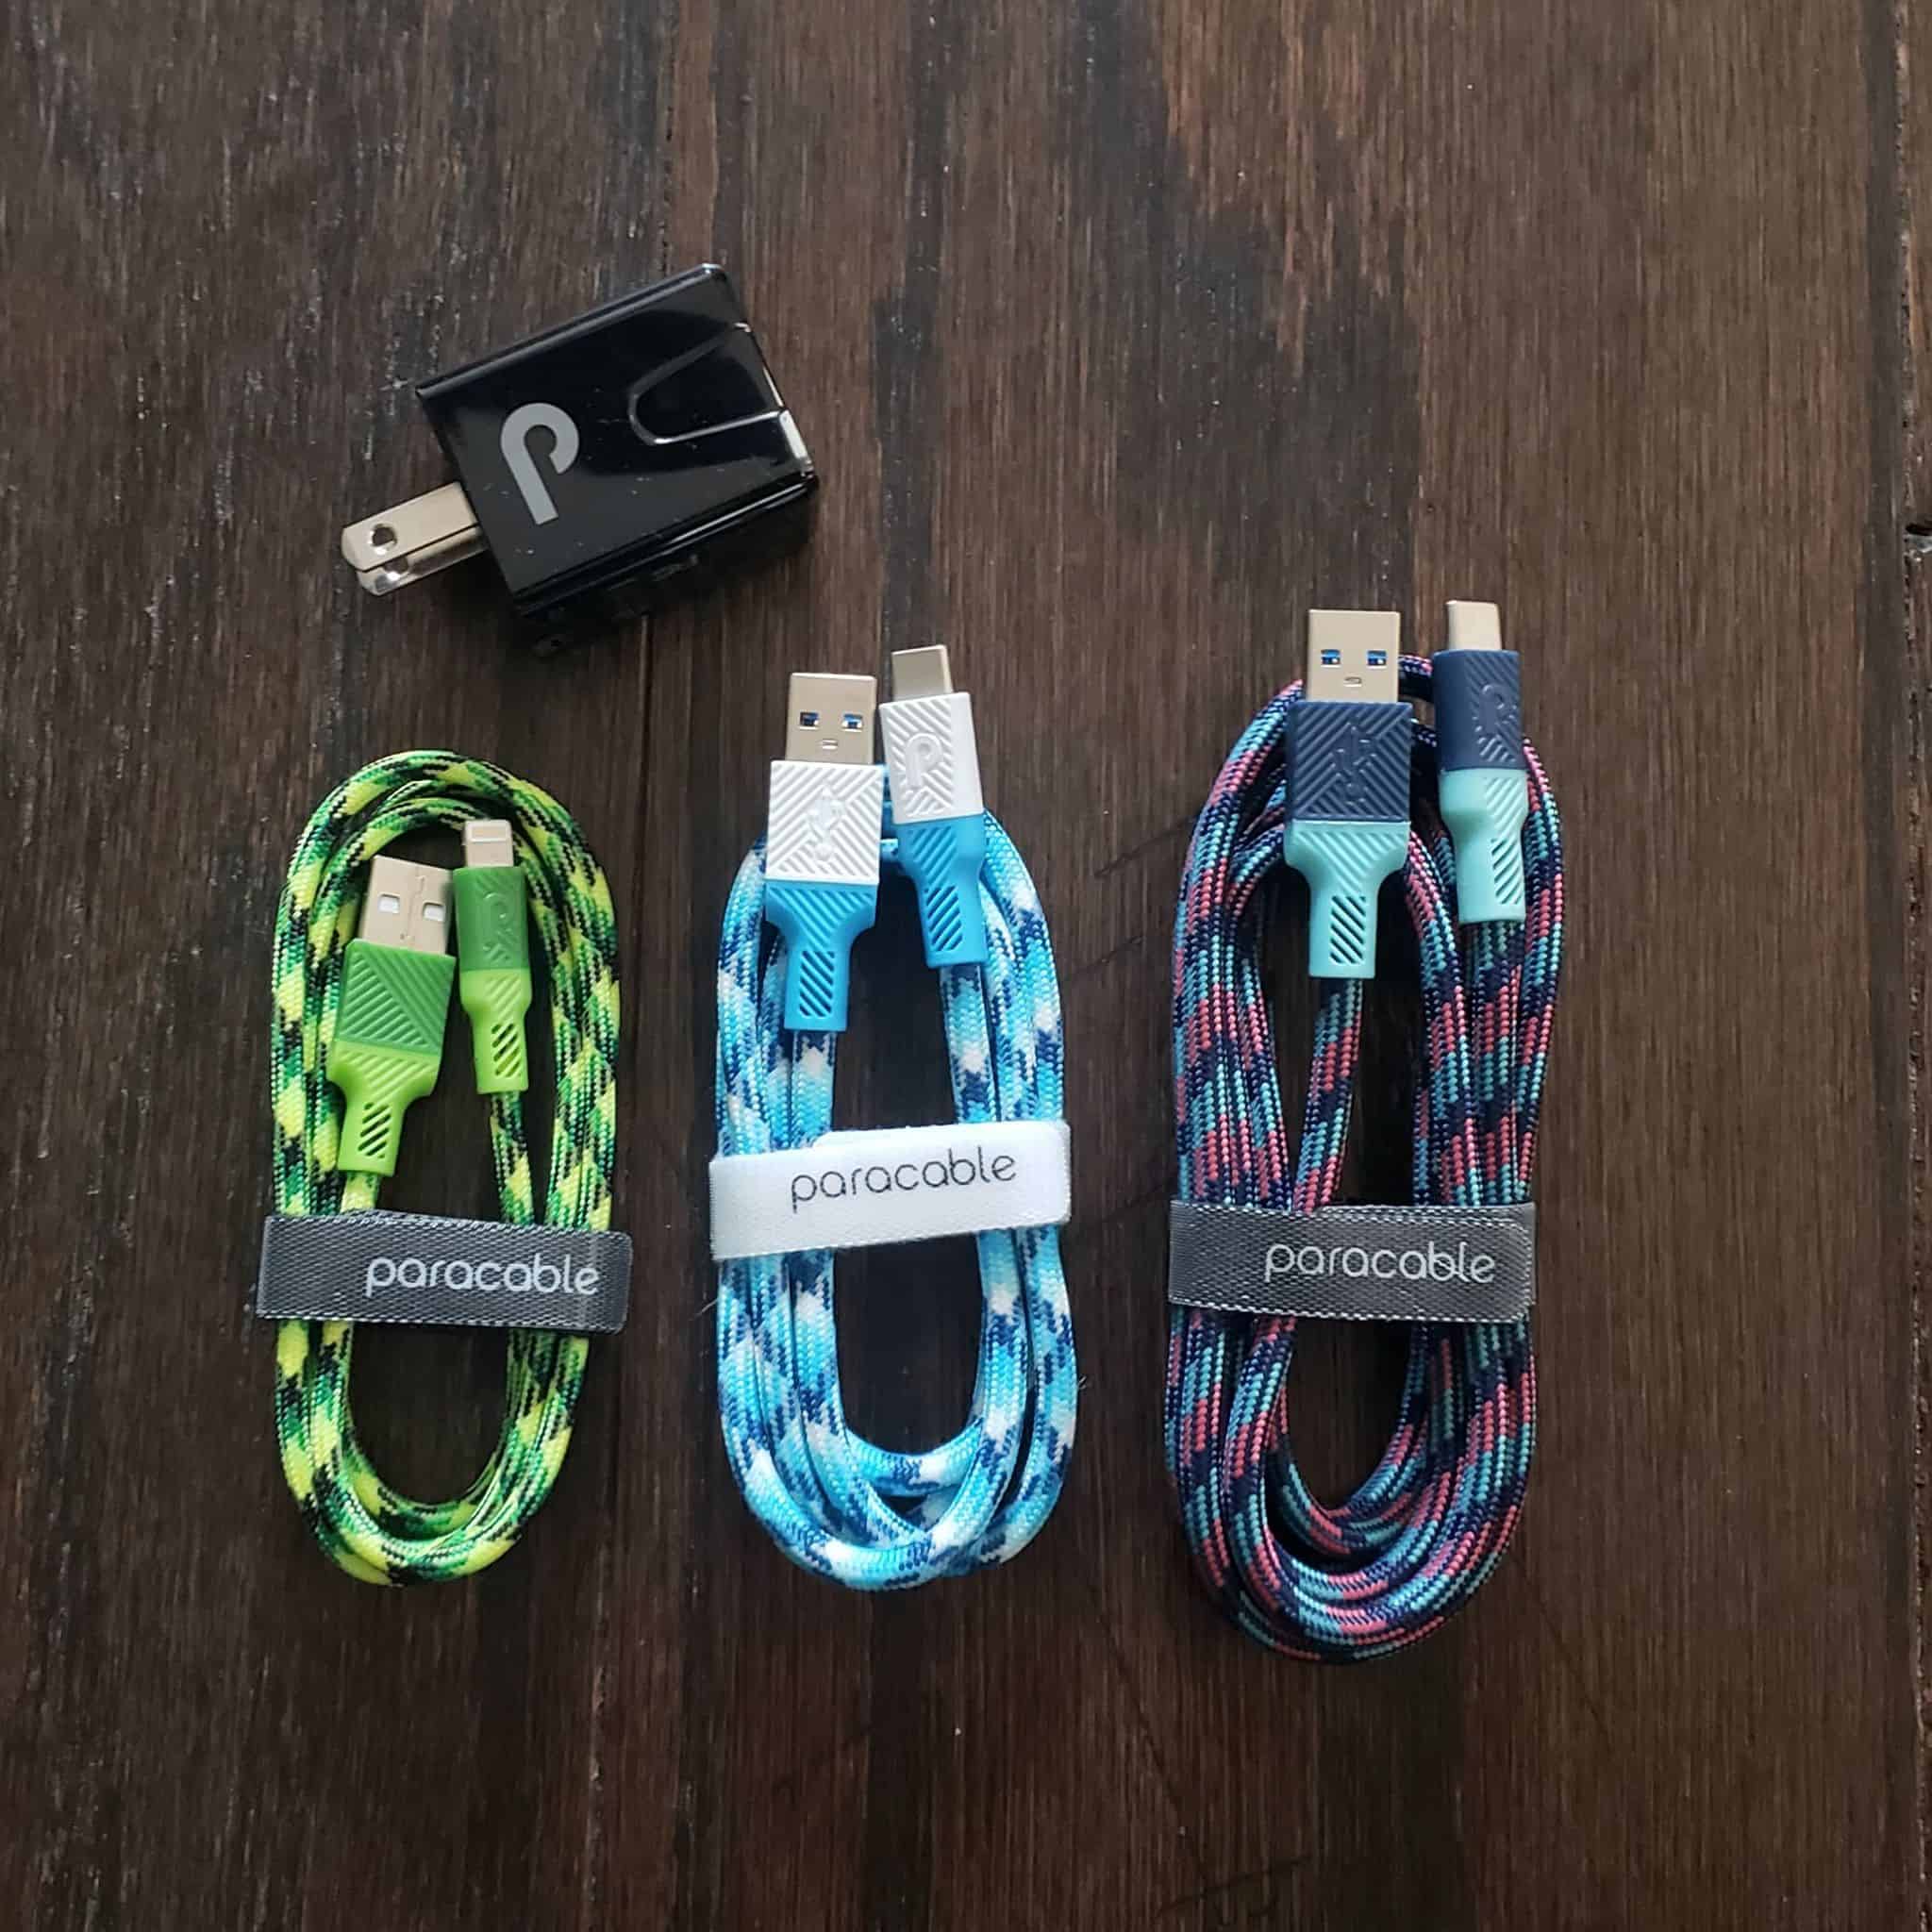 A green, baby blue and multicolored paracable cords with outlet adapter